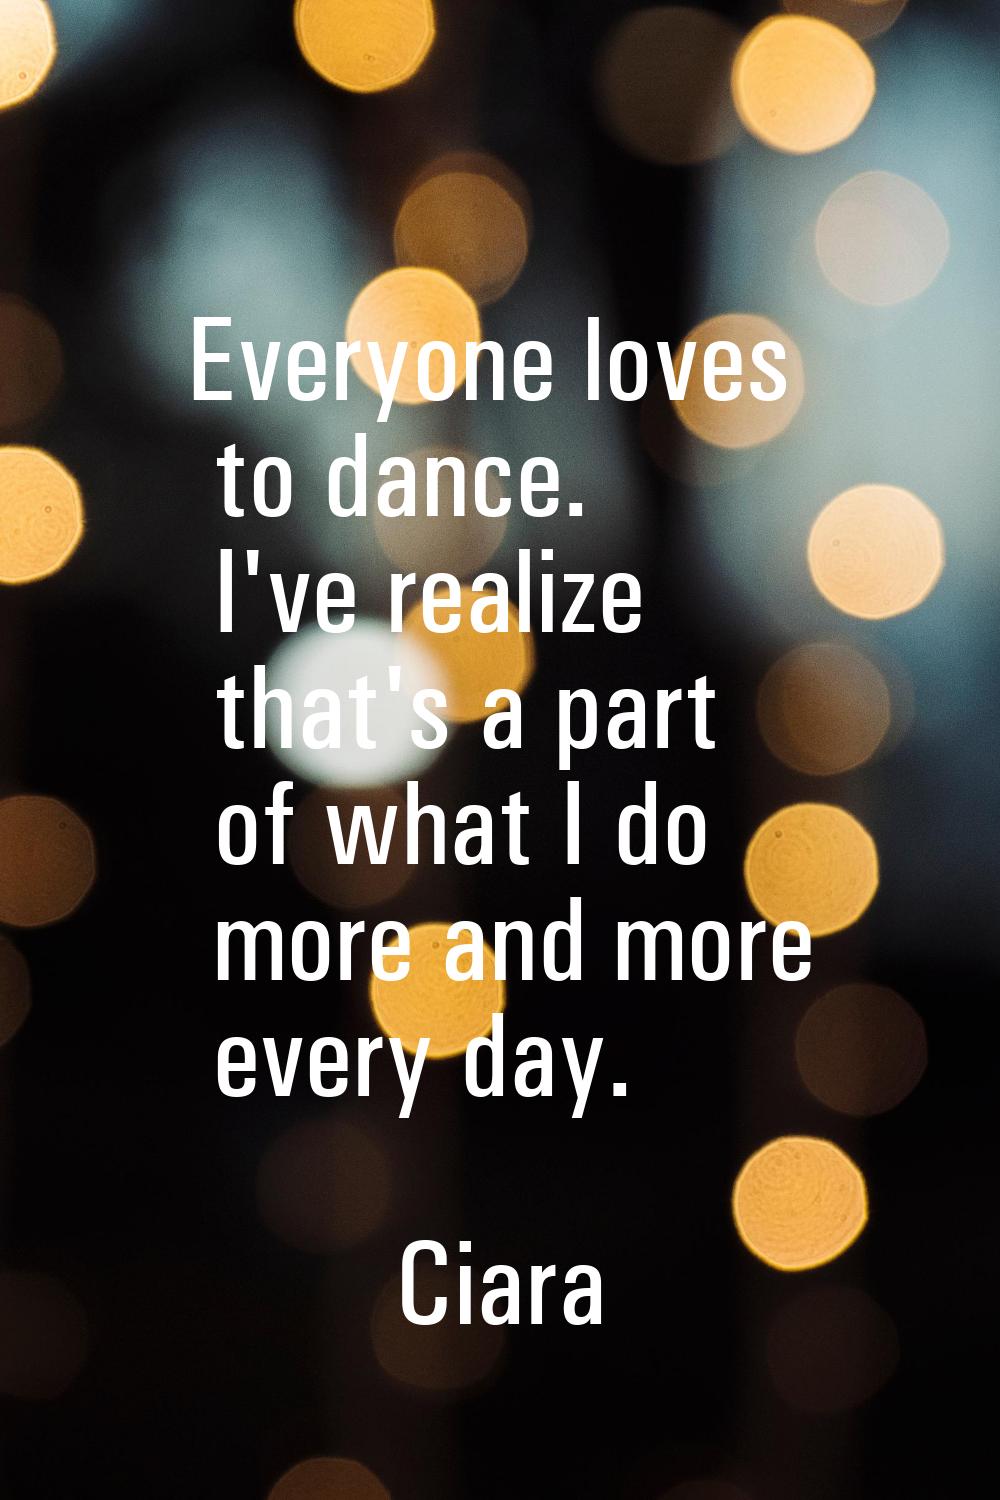 Everyone loves to dance. I've realize that's a part of what I do more and more every day.